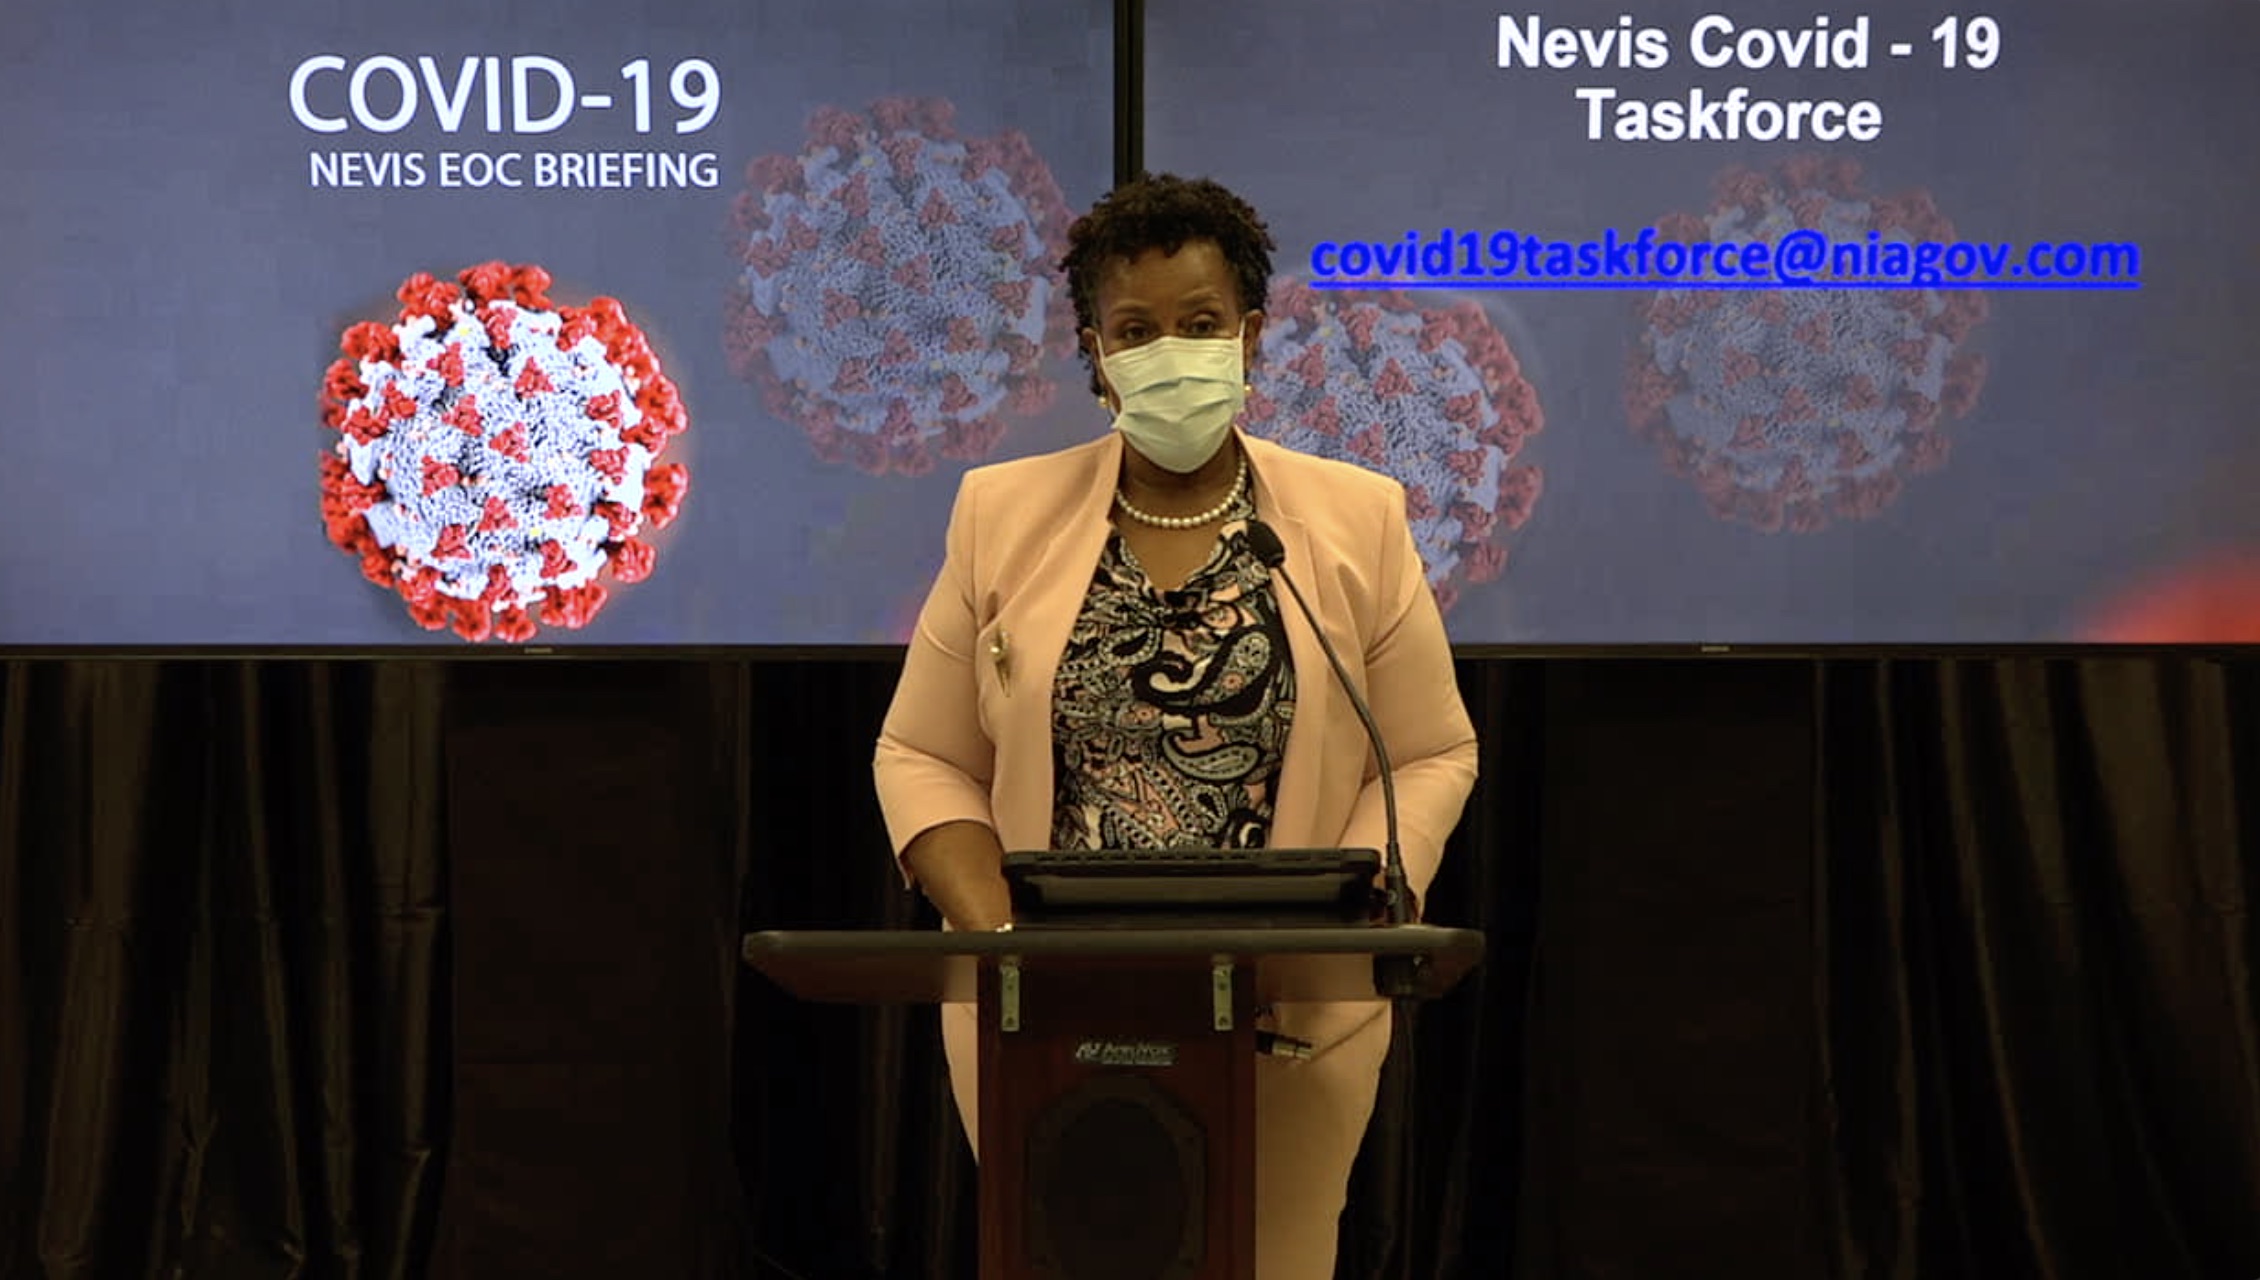 Dr. Judy Nisbett, Chair of the Nevis COVID-19 Task Force making her presentation at the Nevis COVID-19 Emergency Operations Centre Briefing at Long Point on September 28, 2020